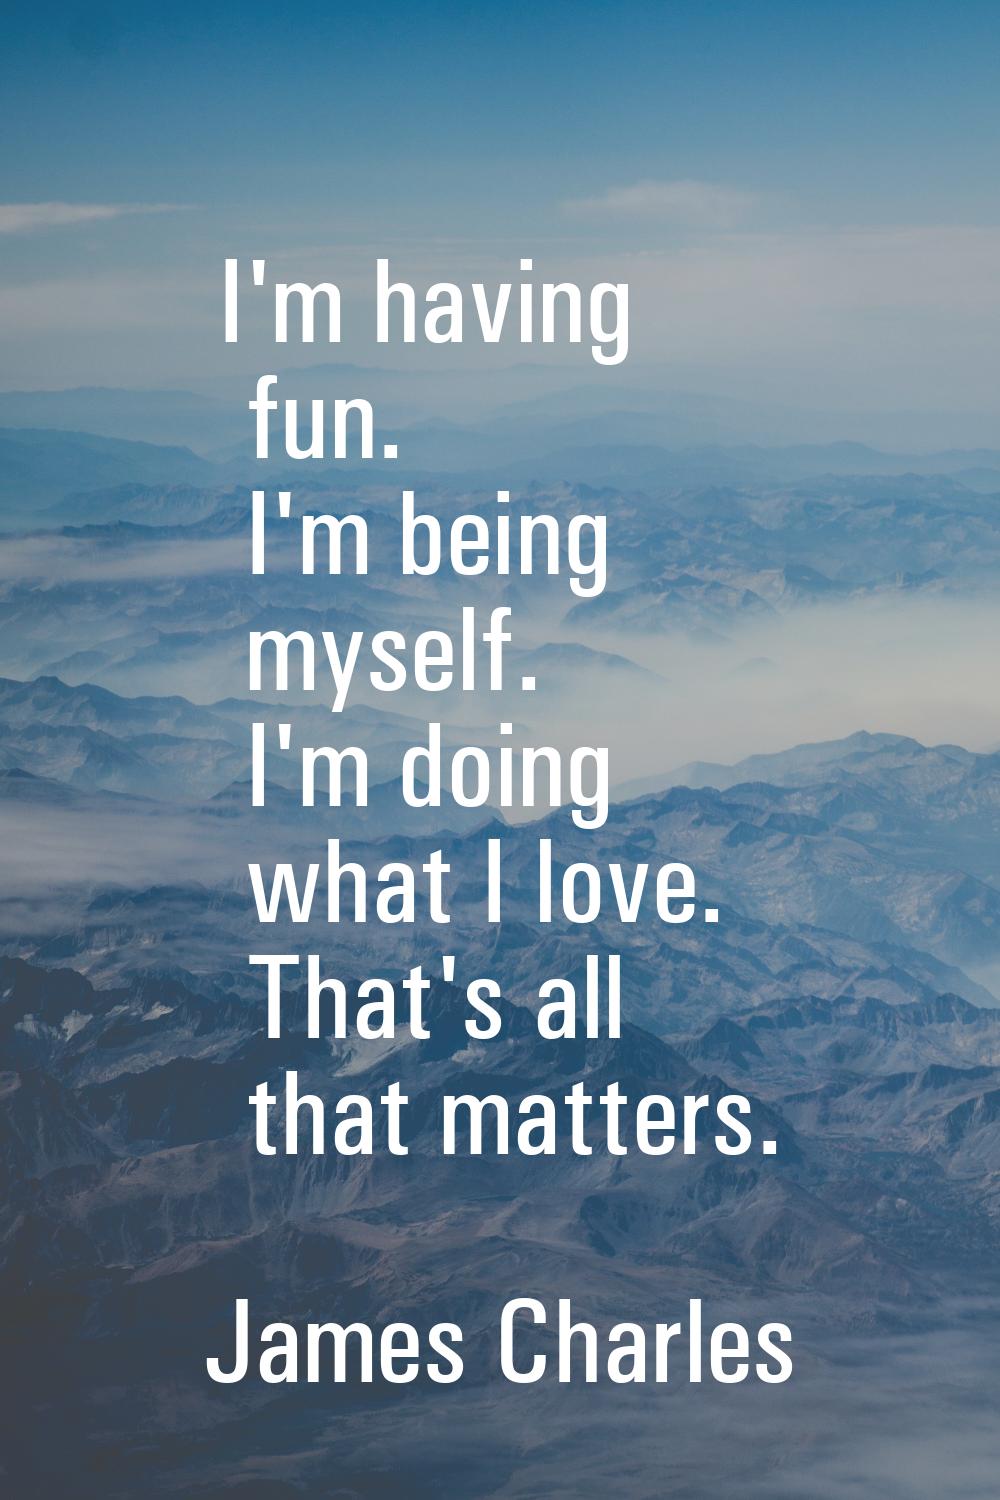 I'm having fun. I'm being myself. I'm doing what I love. That's all that matters.